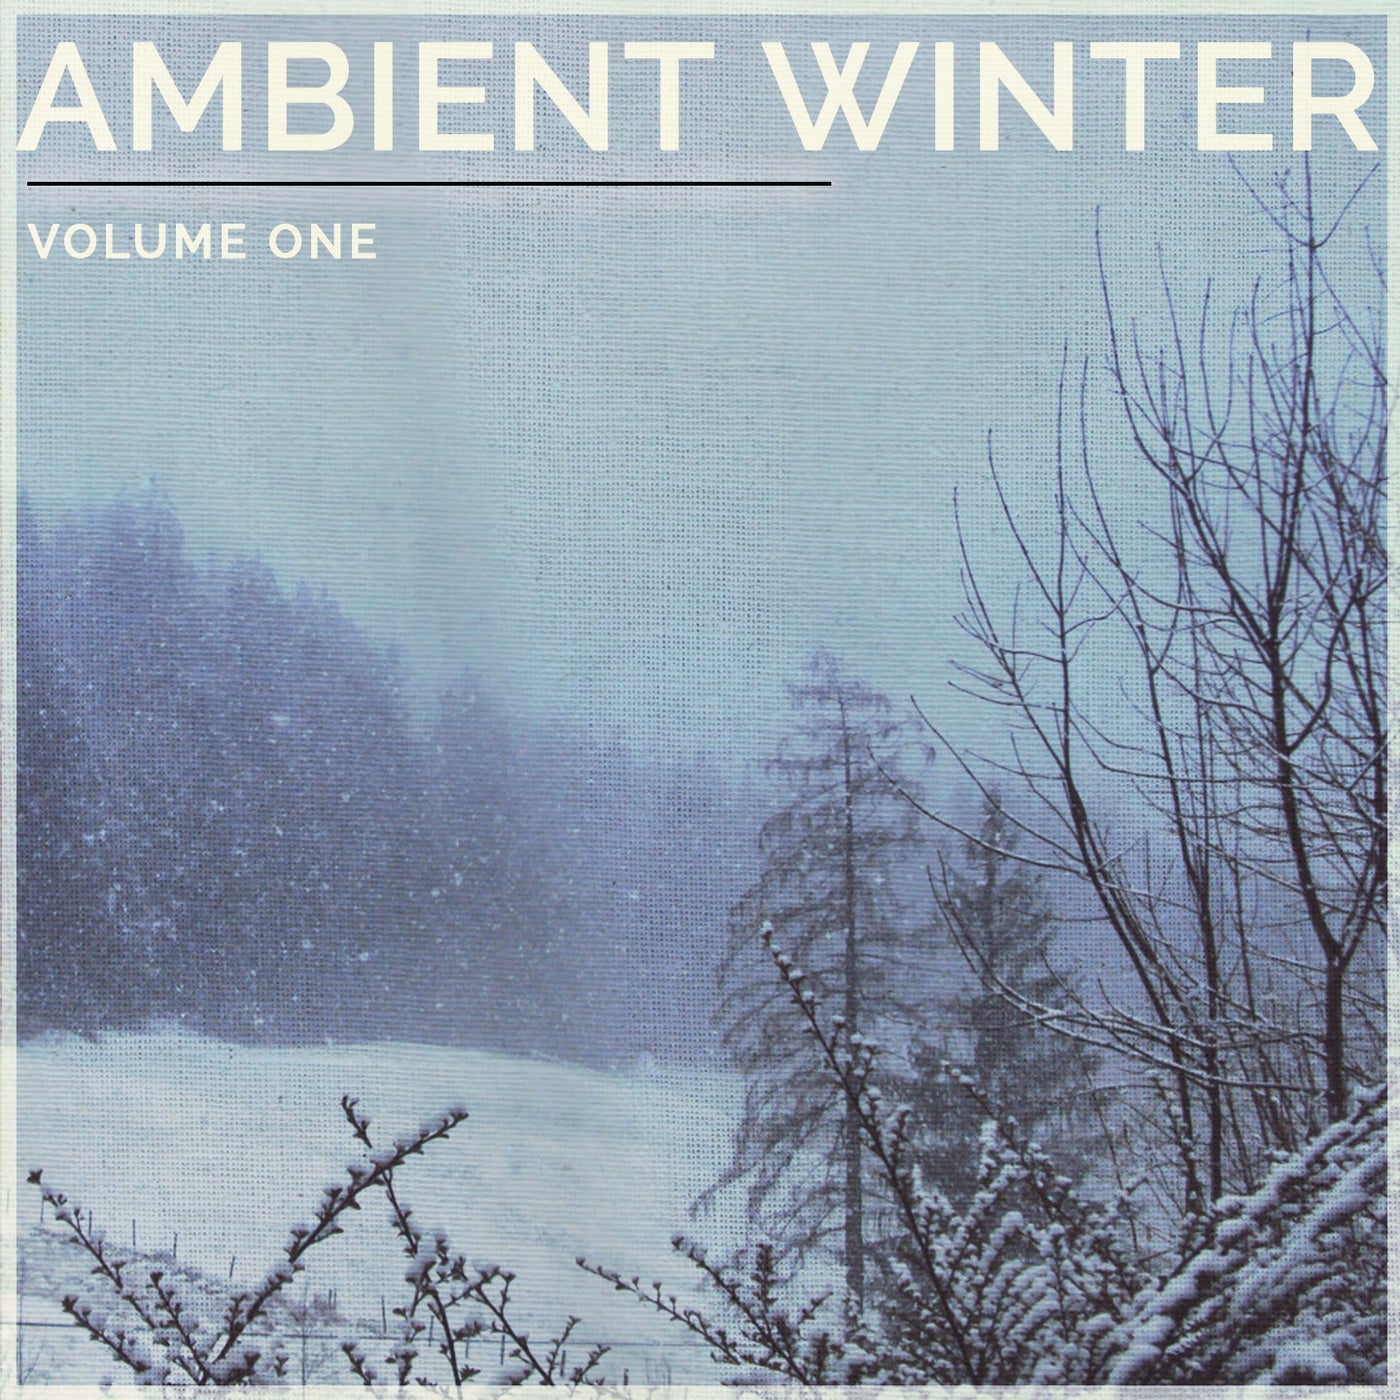 Ambient Winter, Vol. 1 (Wonderful Mix of Chilled Lounge & Smooth Jazz Tunes)